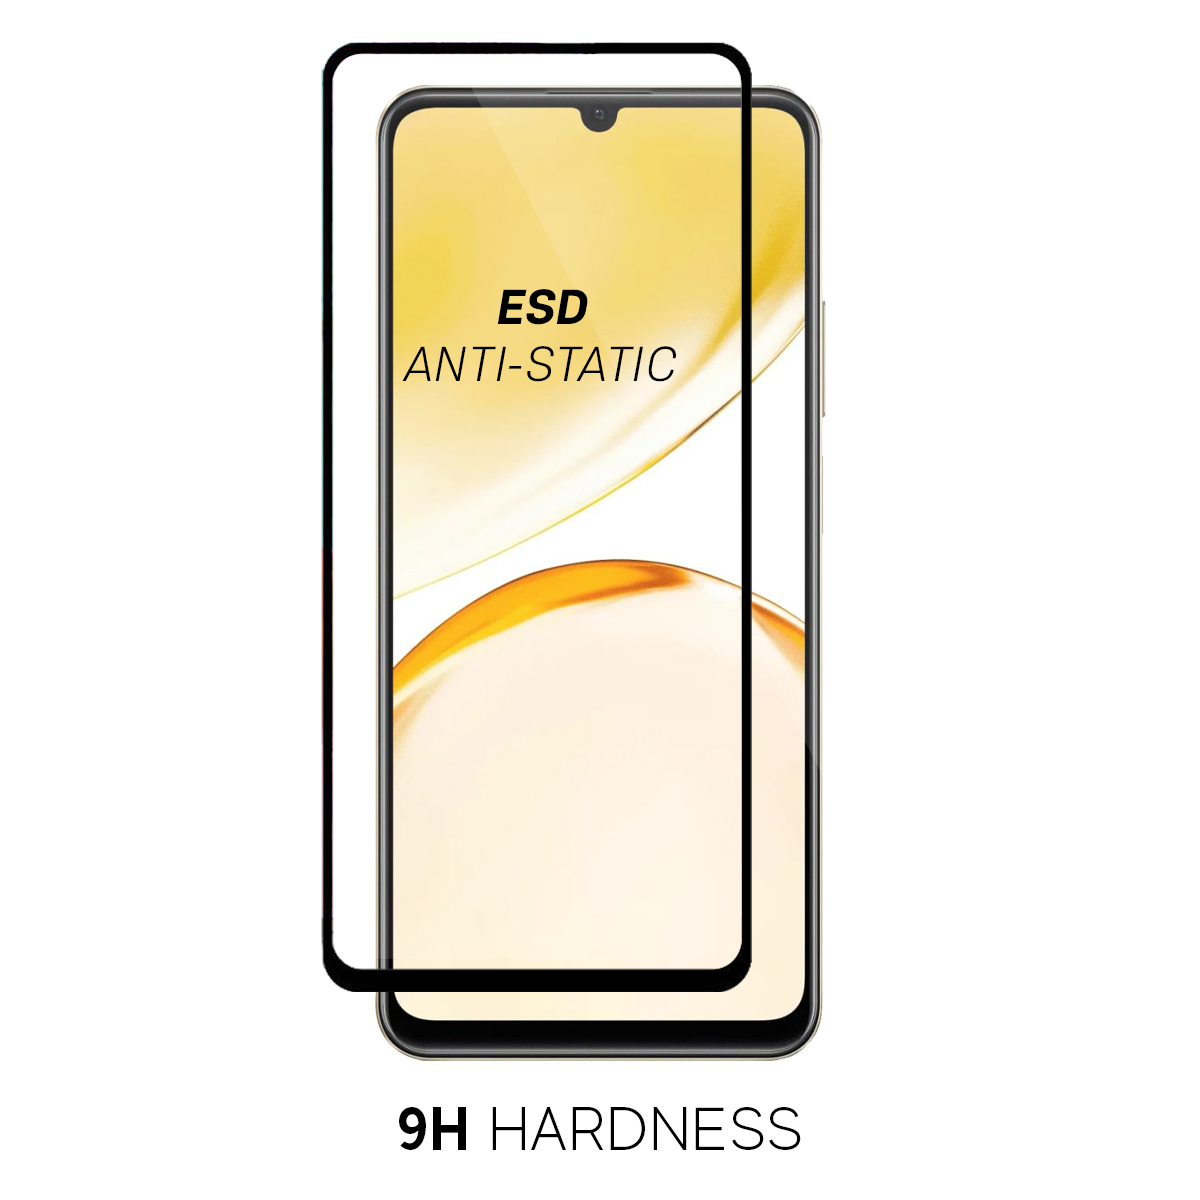 Beyox ESD Anti Static 5D Glass for Realme 5s